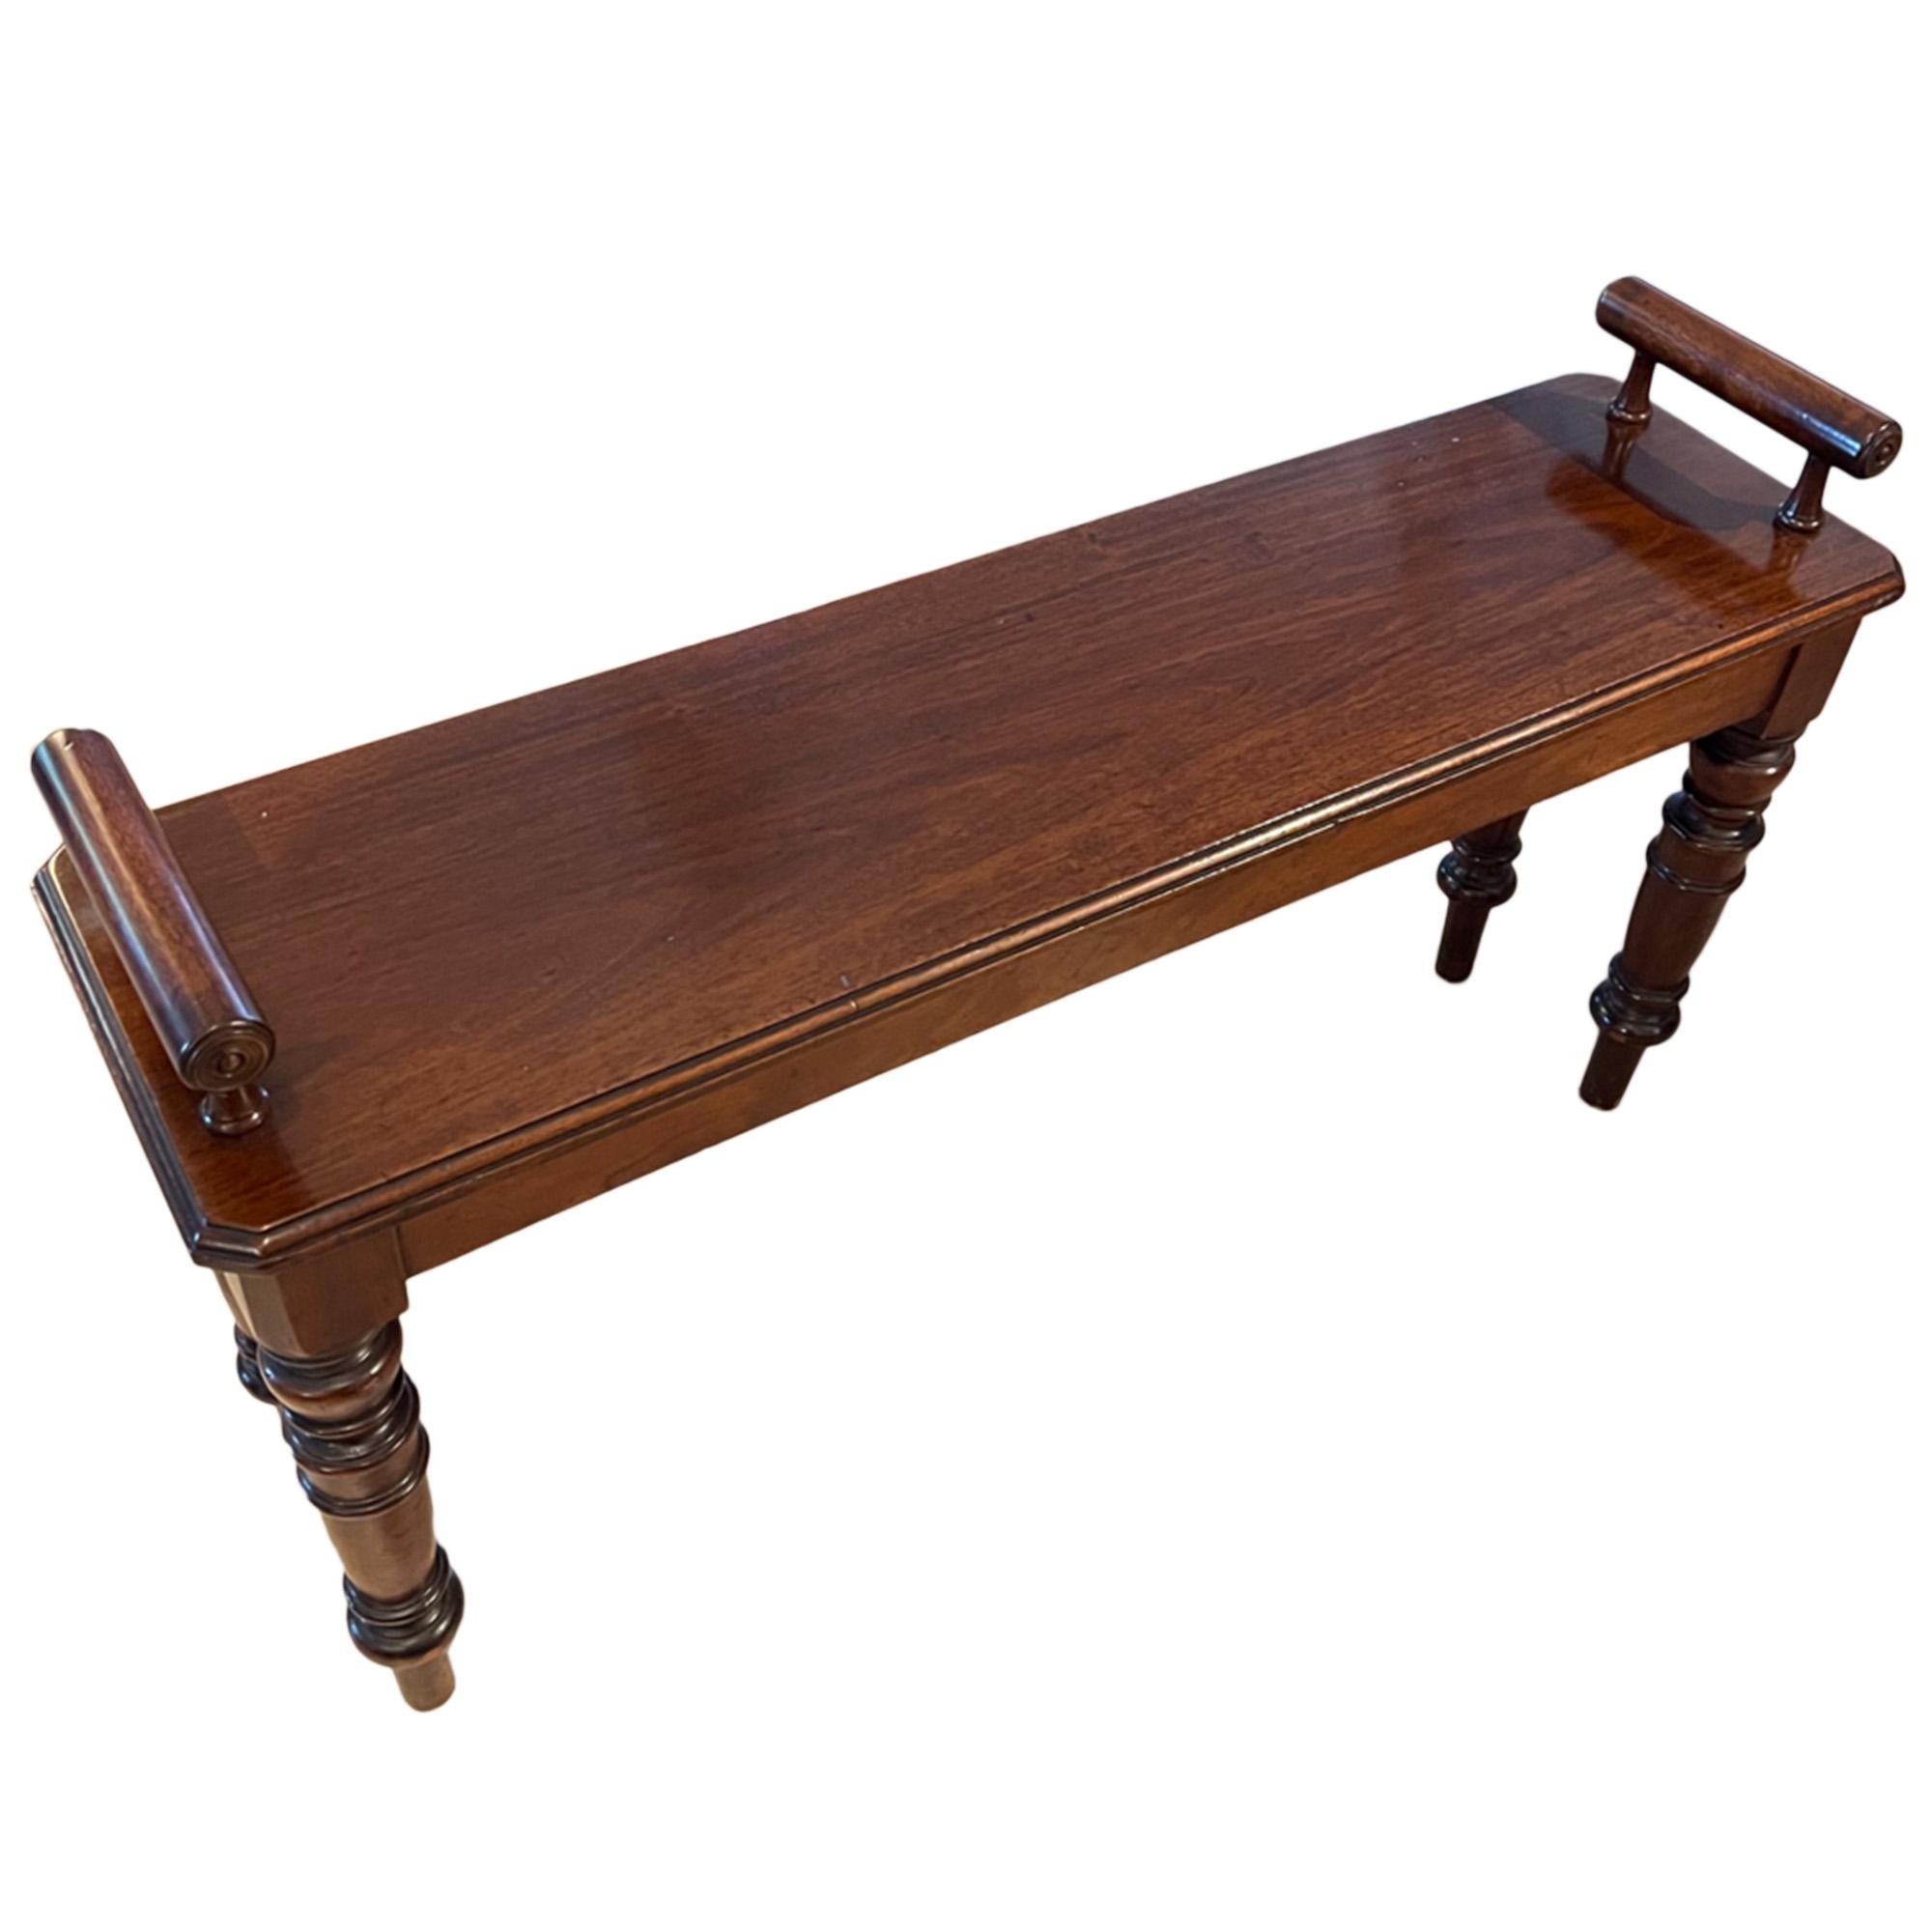 A simple, but elegant mahogany windowseat or bench with a rectangular top, raised bolster ends and turned tapering legs.

A lovely piece of traditional English furniture for a window, end of bed, or hallway. 

Made in England in the 1950s.

Full